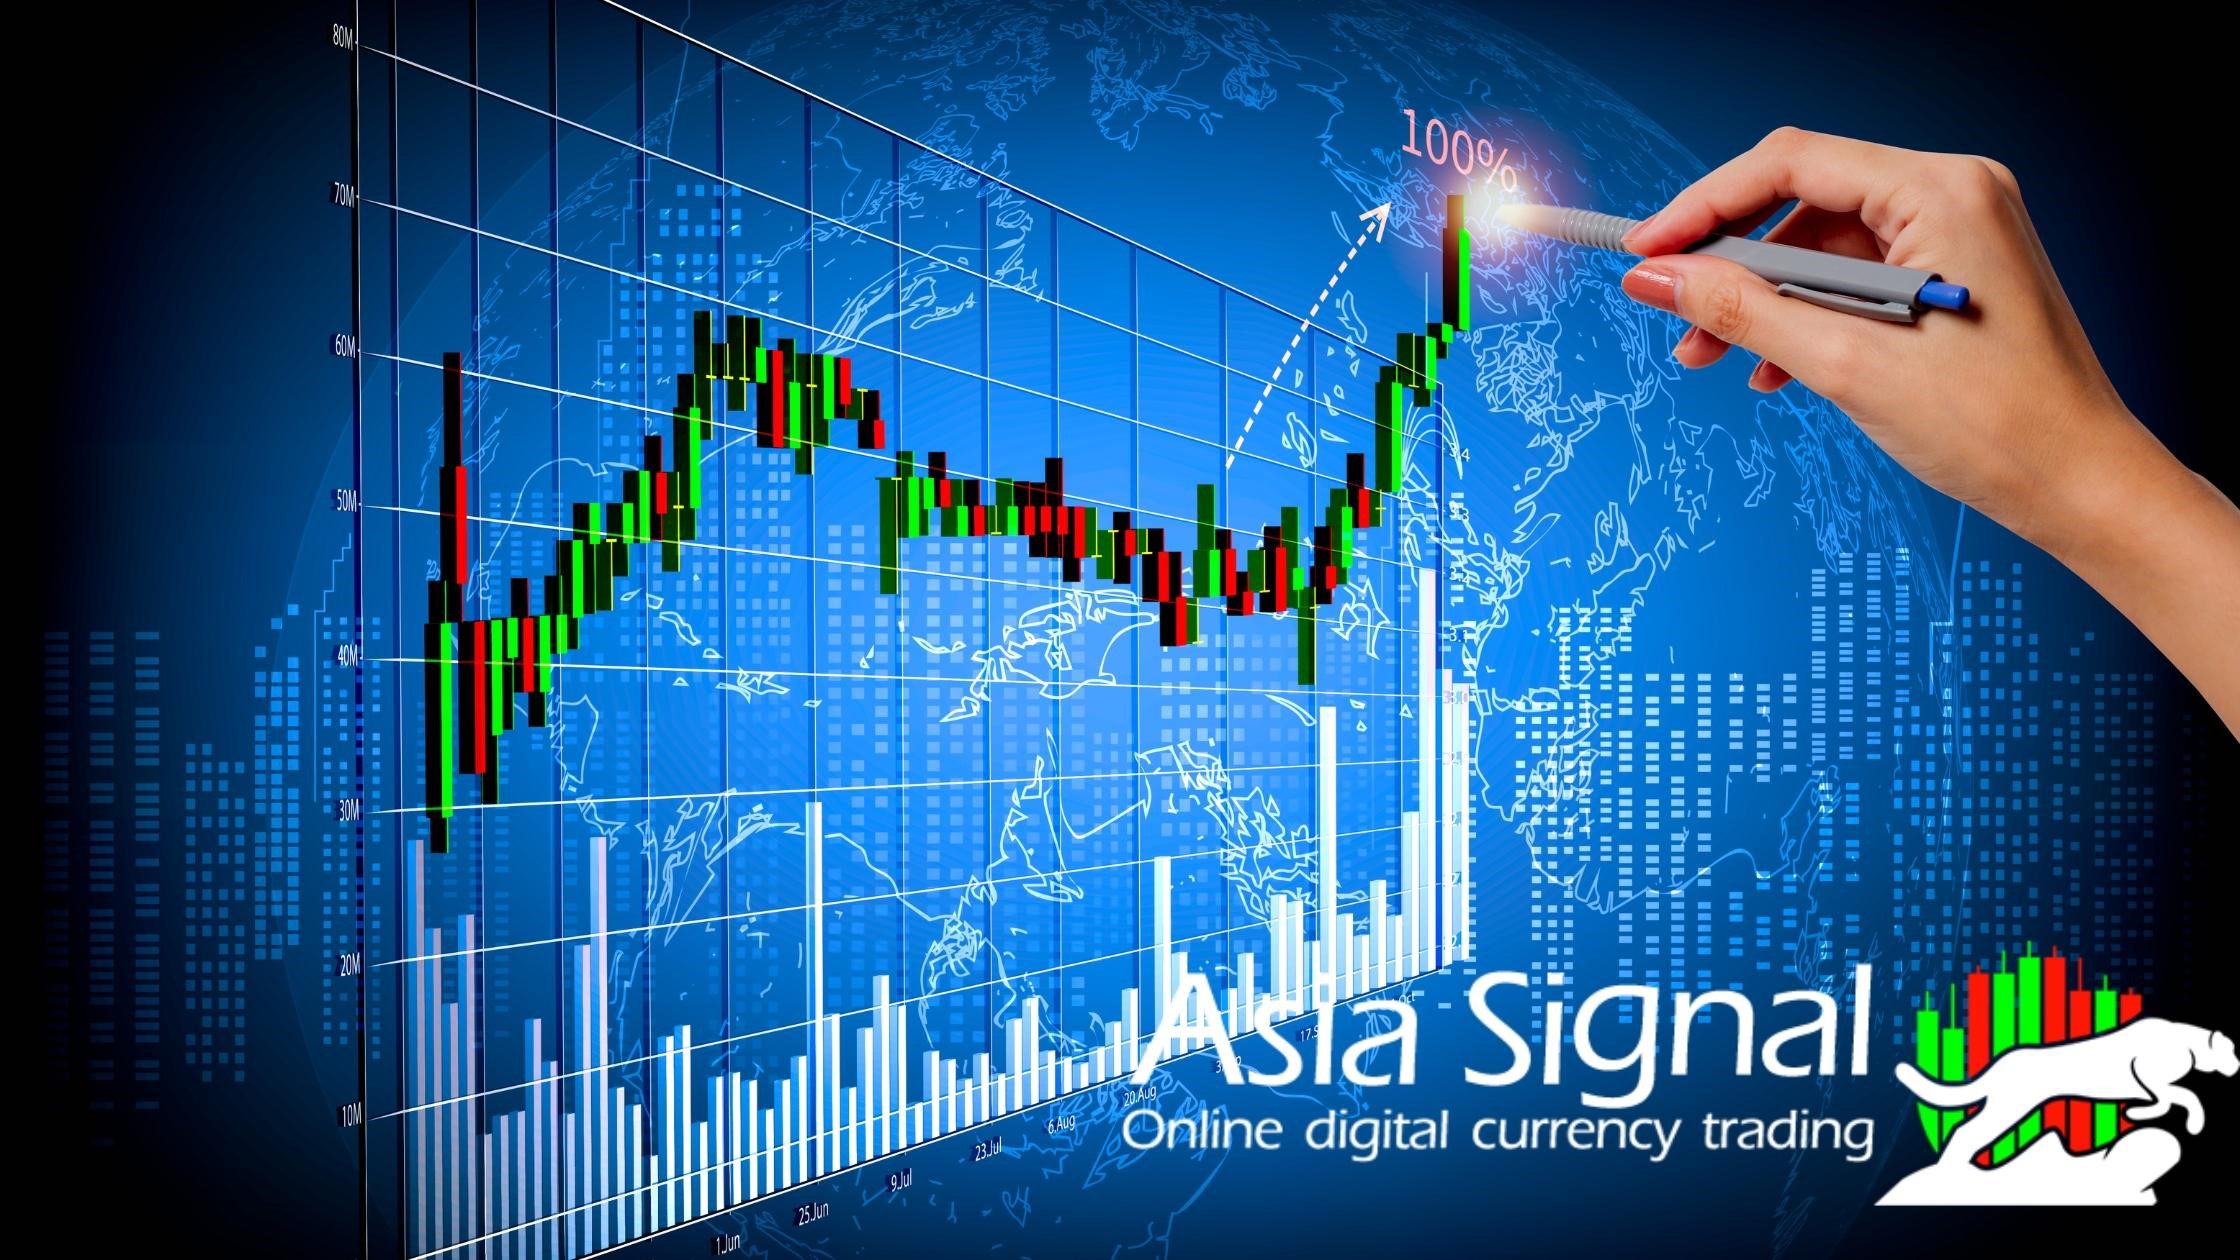 What is a futures signal?